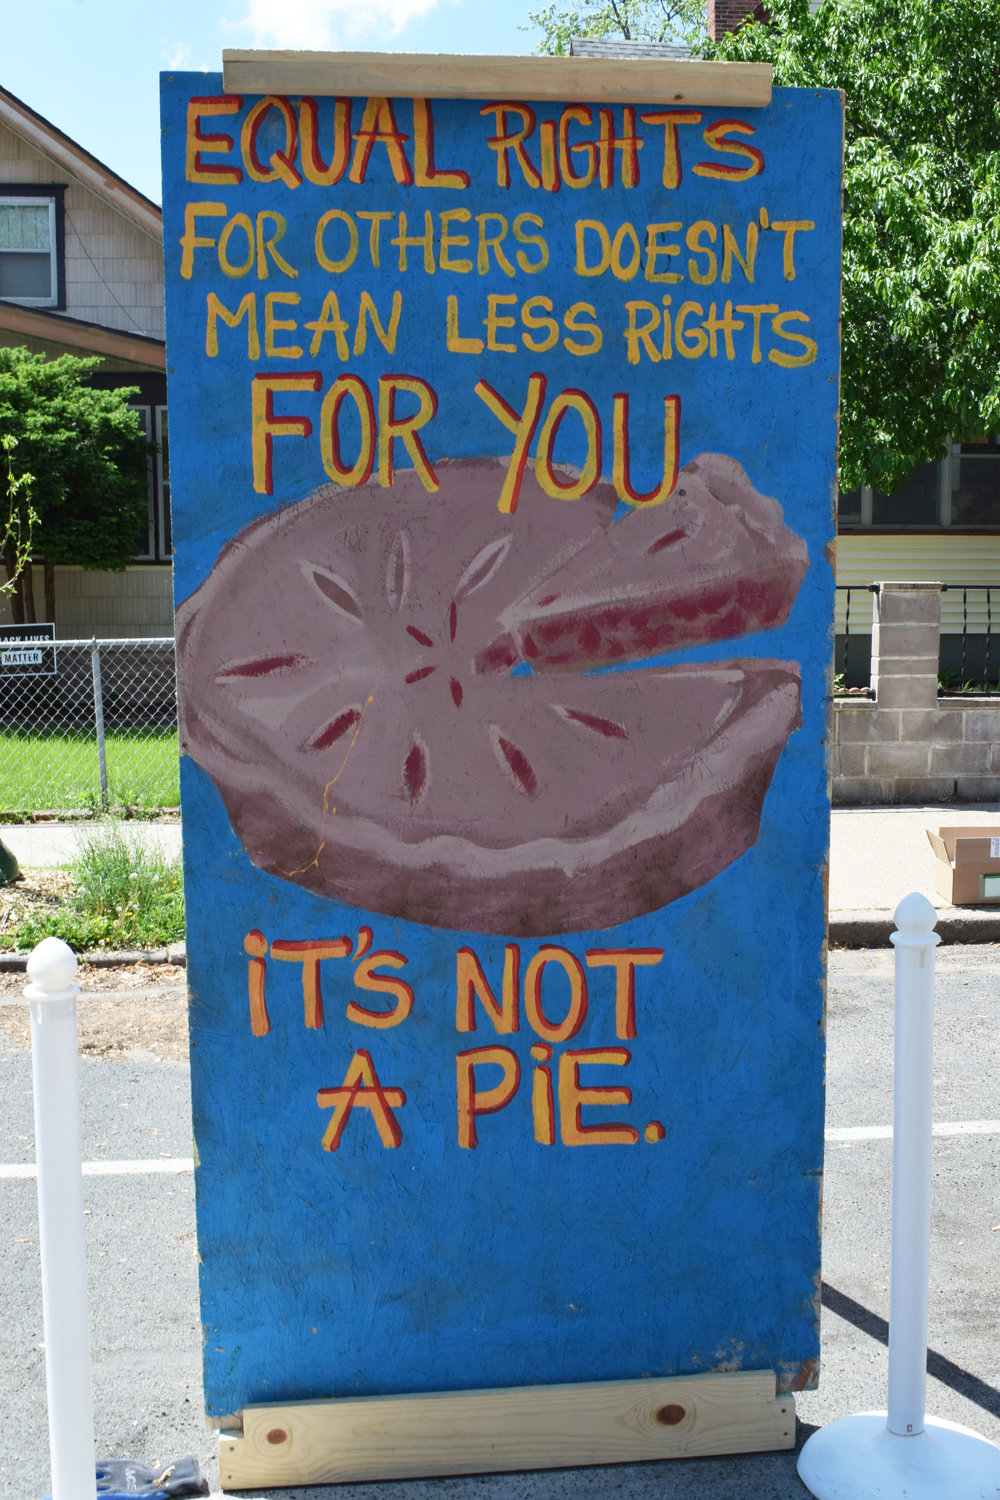 Plywood art mural reads “Equal rights for others doesn’t mean less rights for you. It’s not a pie.” Some of the plywood art murals collected since last year’s uprising line Chicago Ave. during the one-year celebration on May 25th. Save the Boards, Memorialize the Movement and the Minnesota African American Heritage Museum and Gallery sponsored the first public installation of these murals the previous weekend on May 22. More information is at memorializethemovement.com.